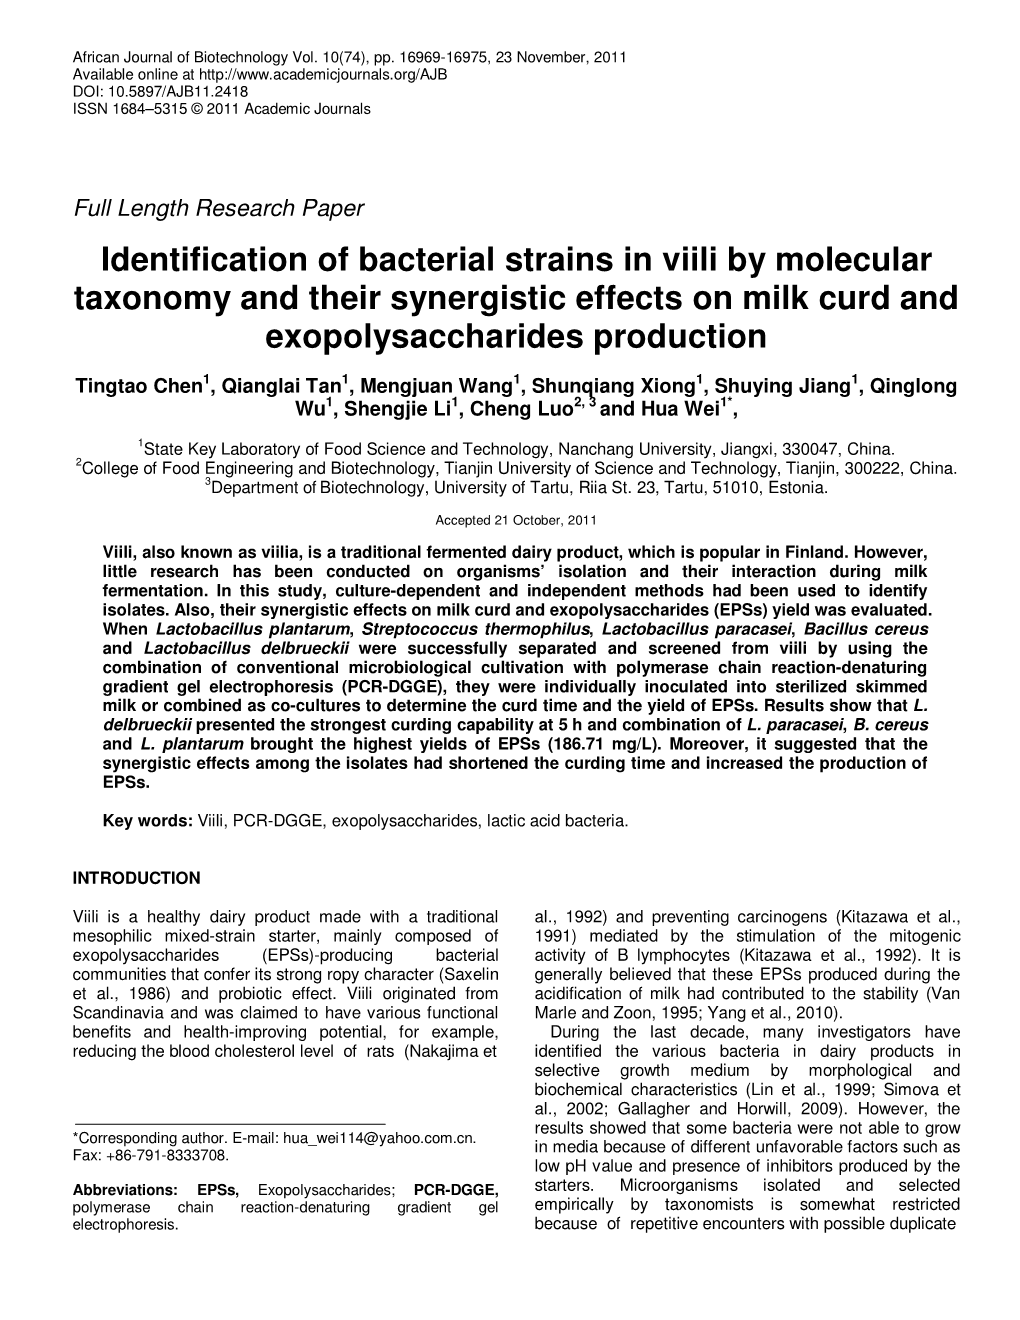 Identification of Bacterial Strains in Viili by Molecular Taxonomy and Their Synergistic Effects on Milk Curd and Exopolysaccharides Production